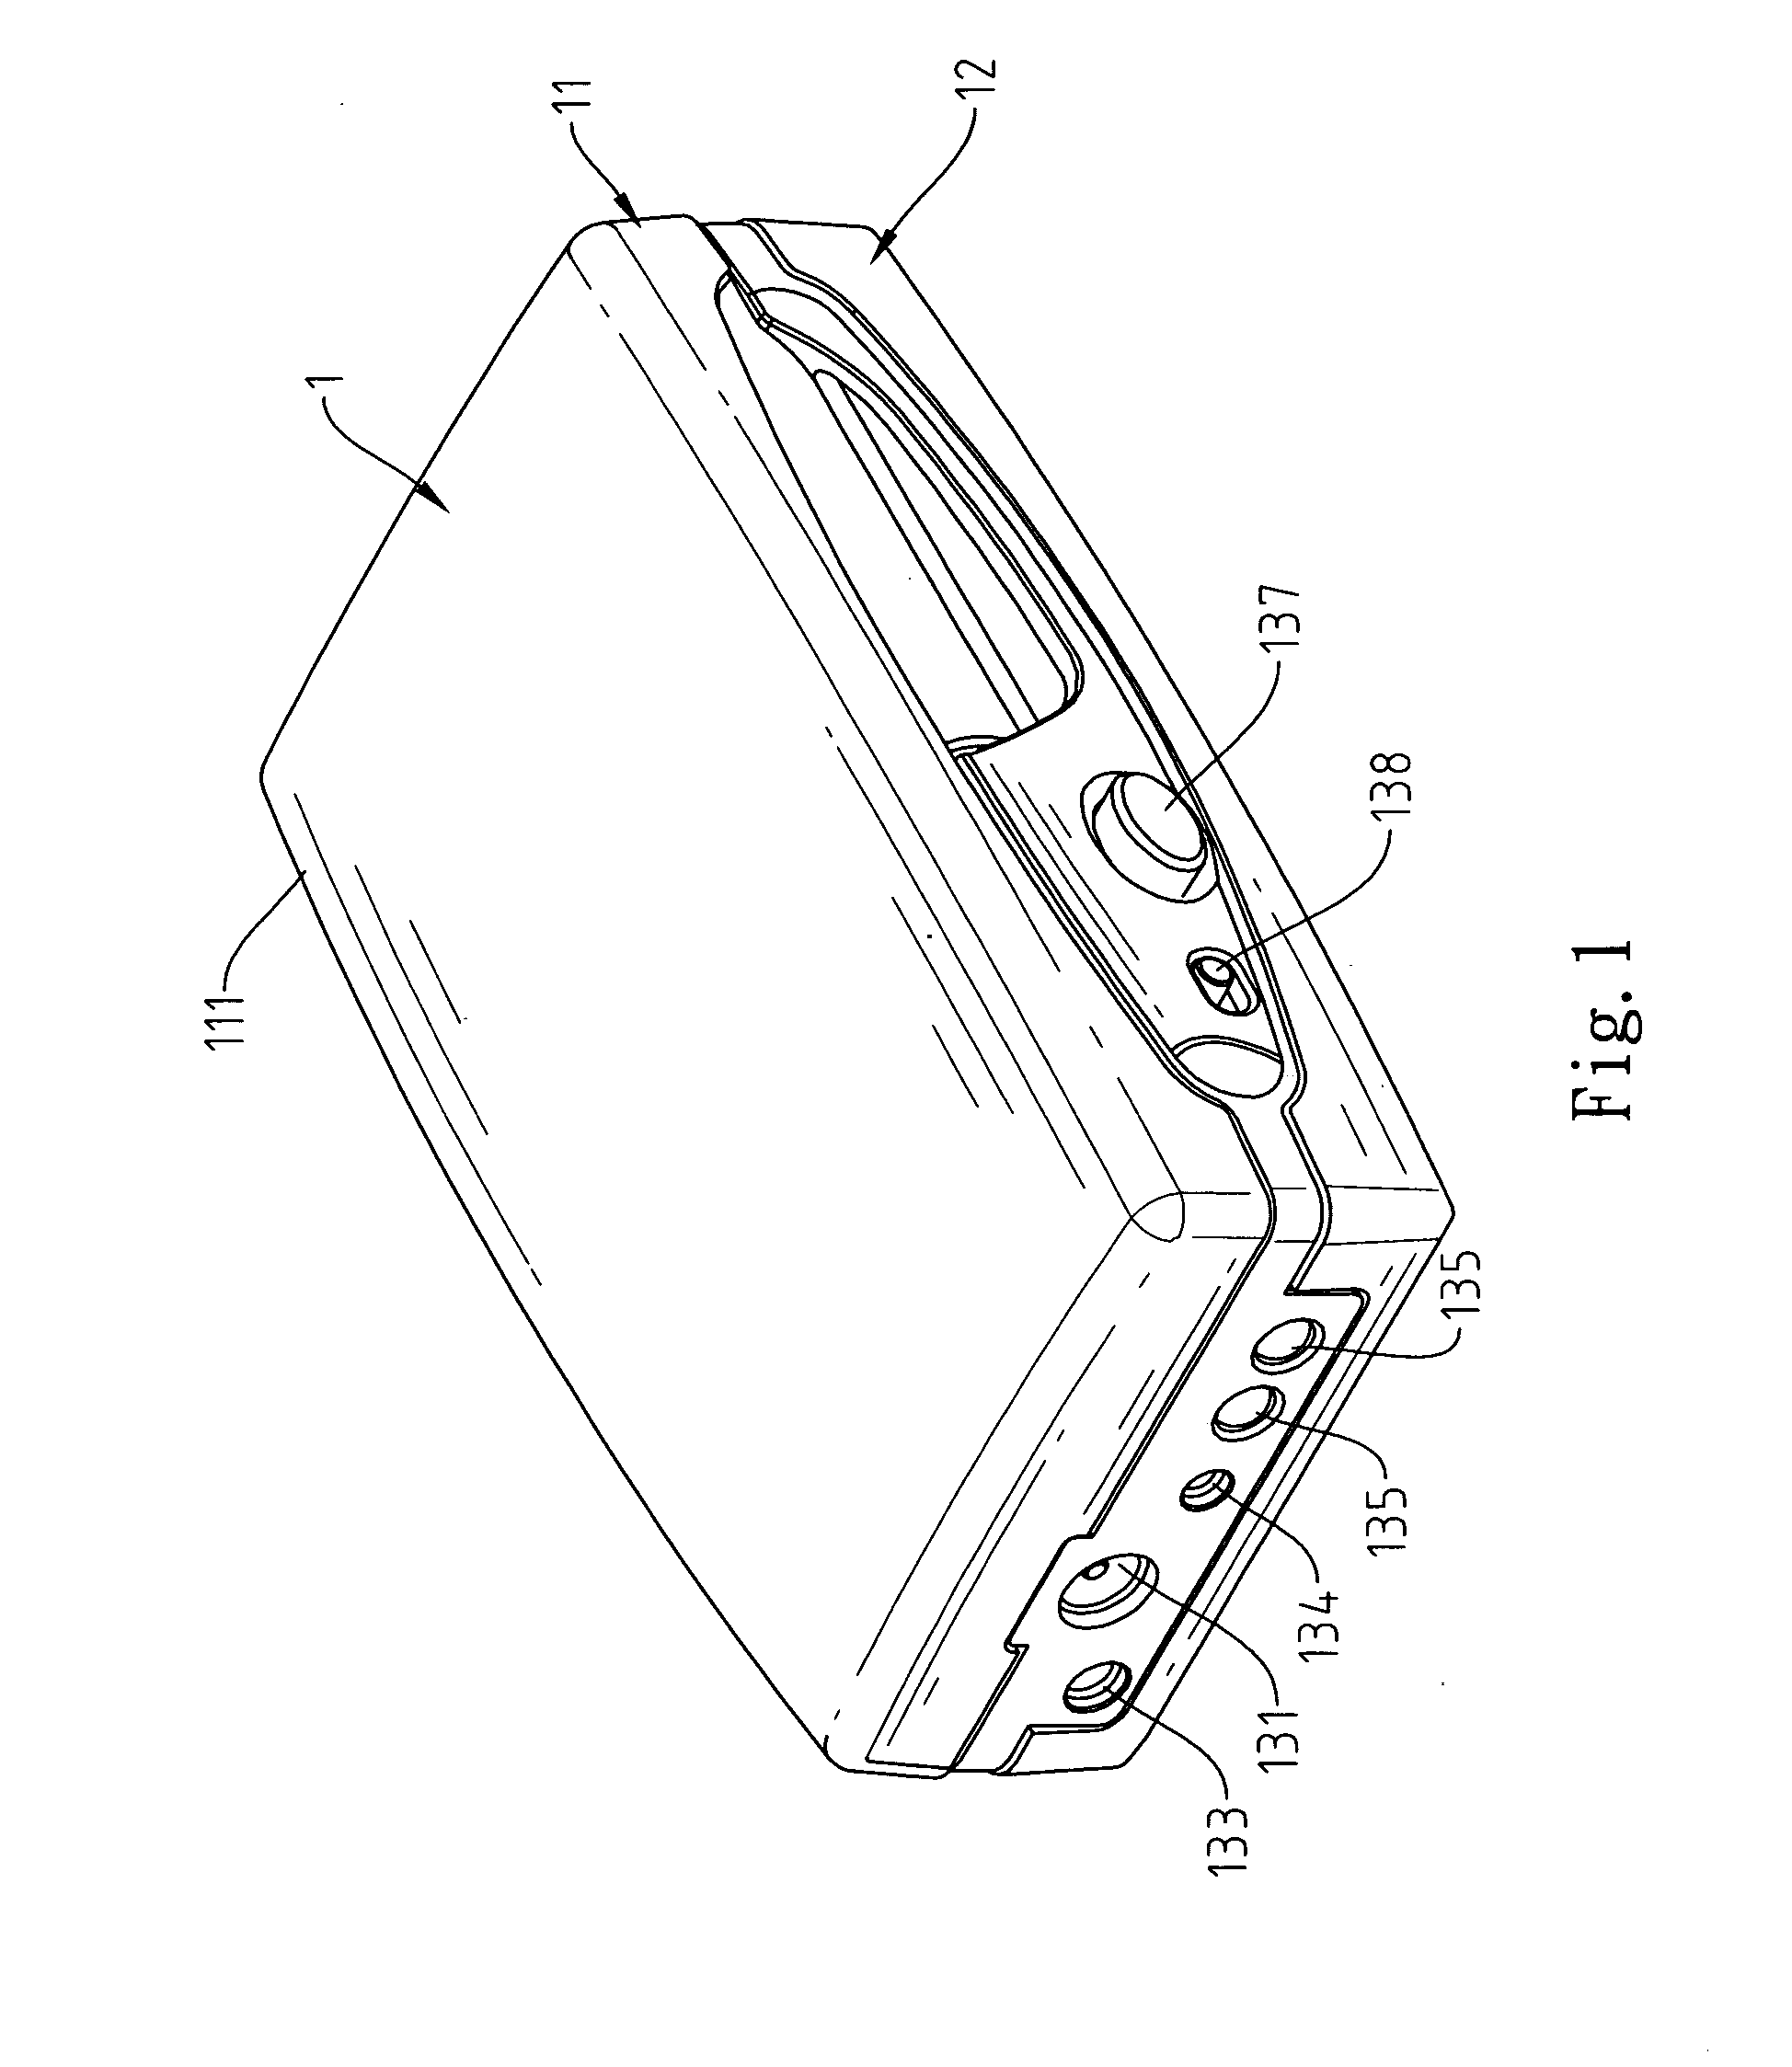 Portable charging device capable of outputting voltage